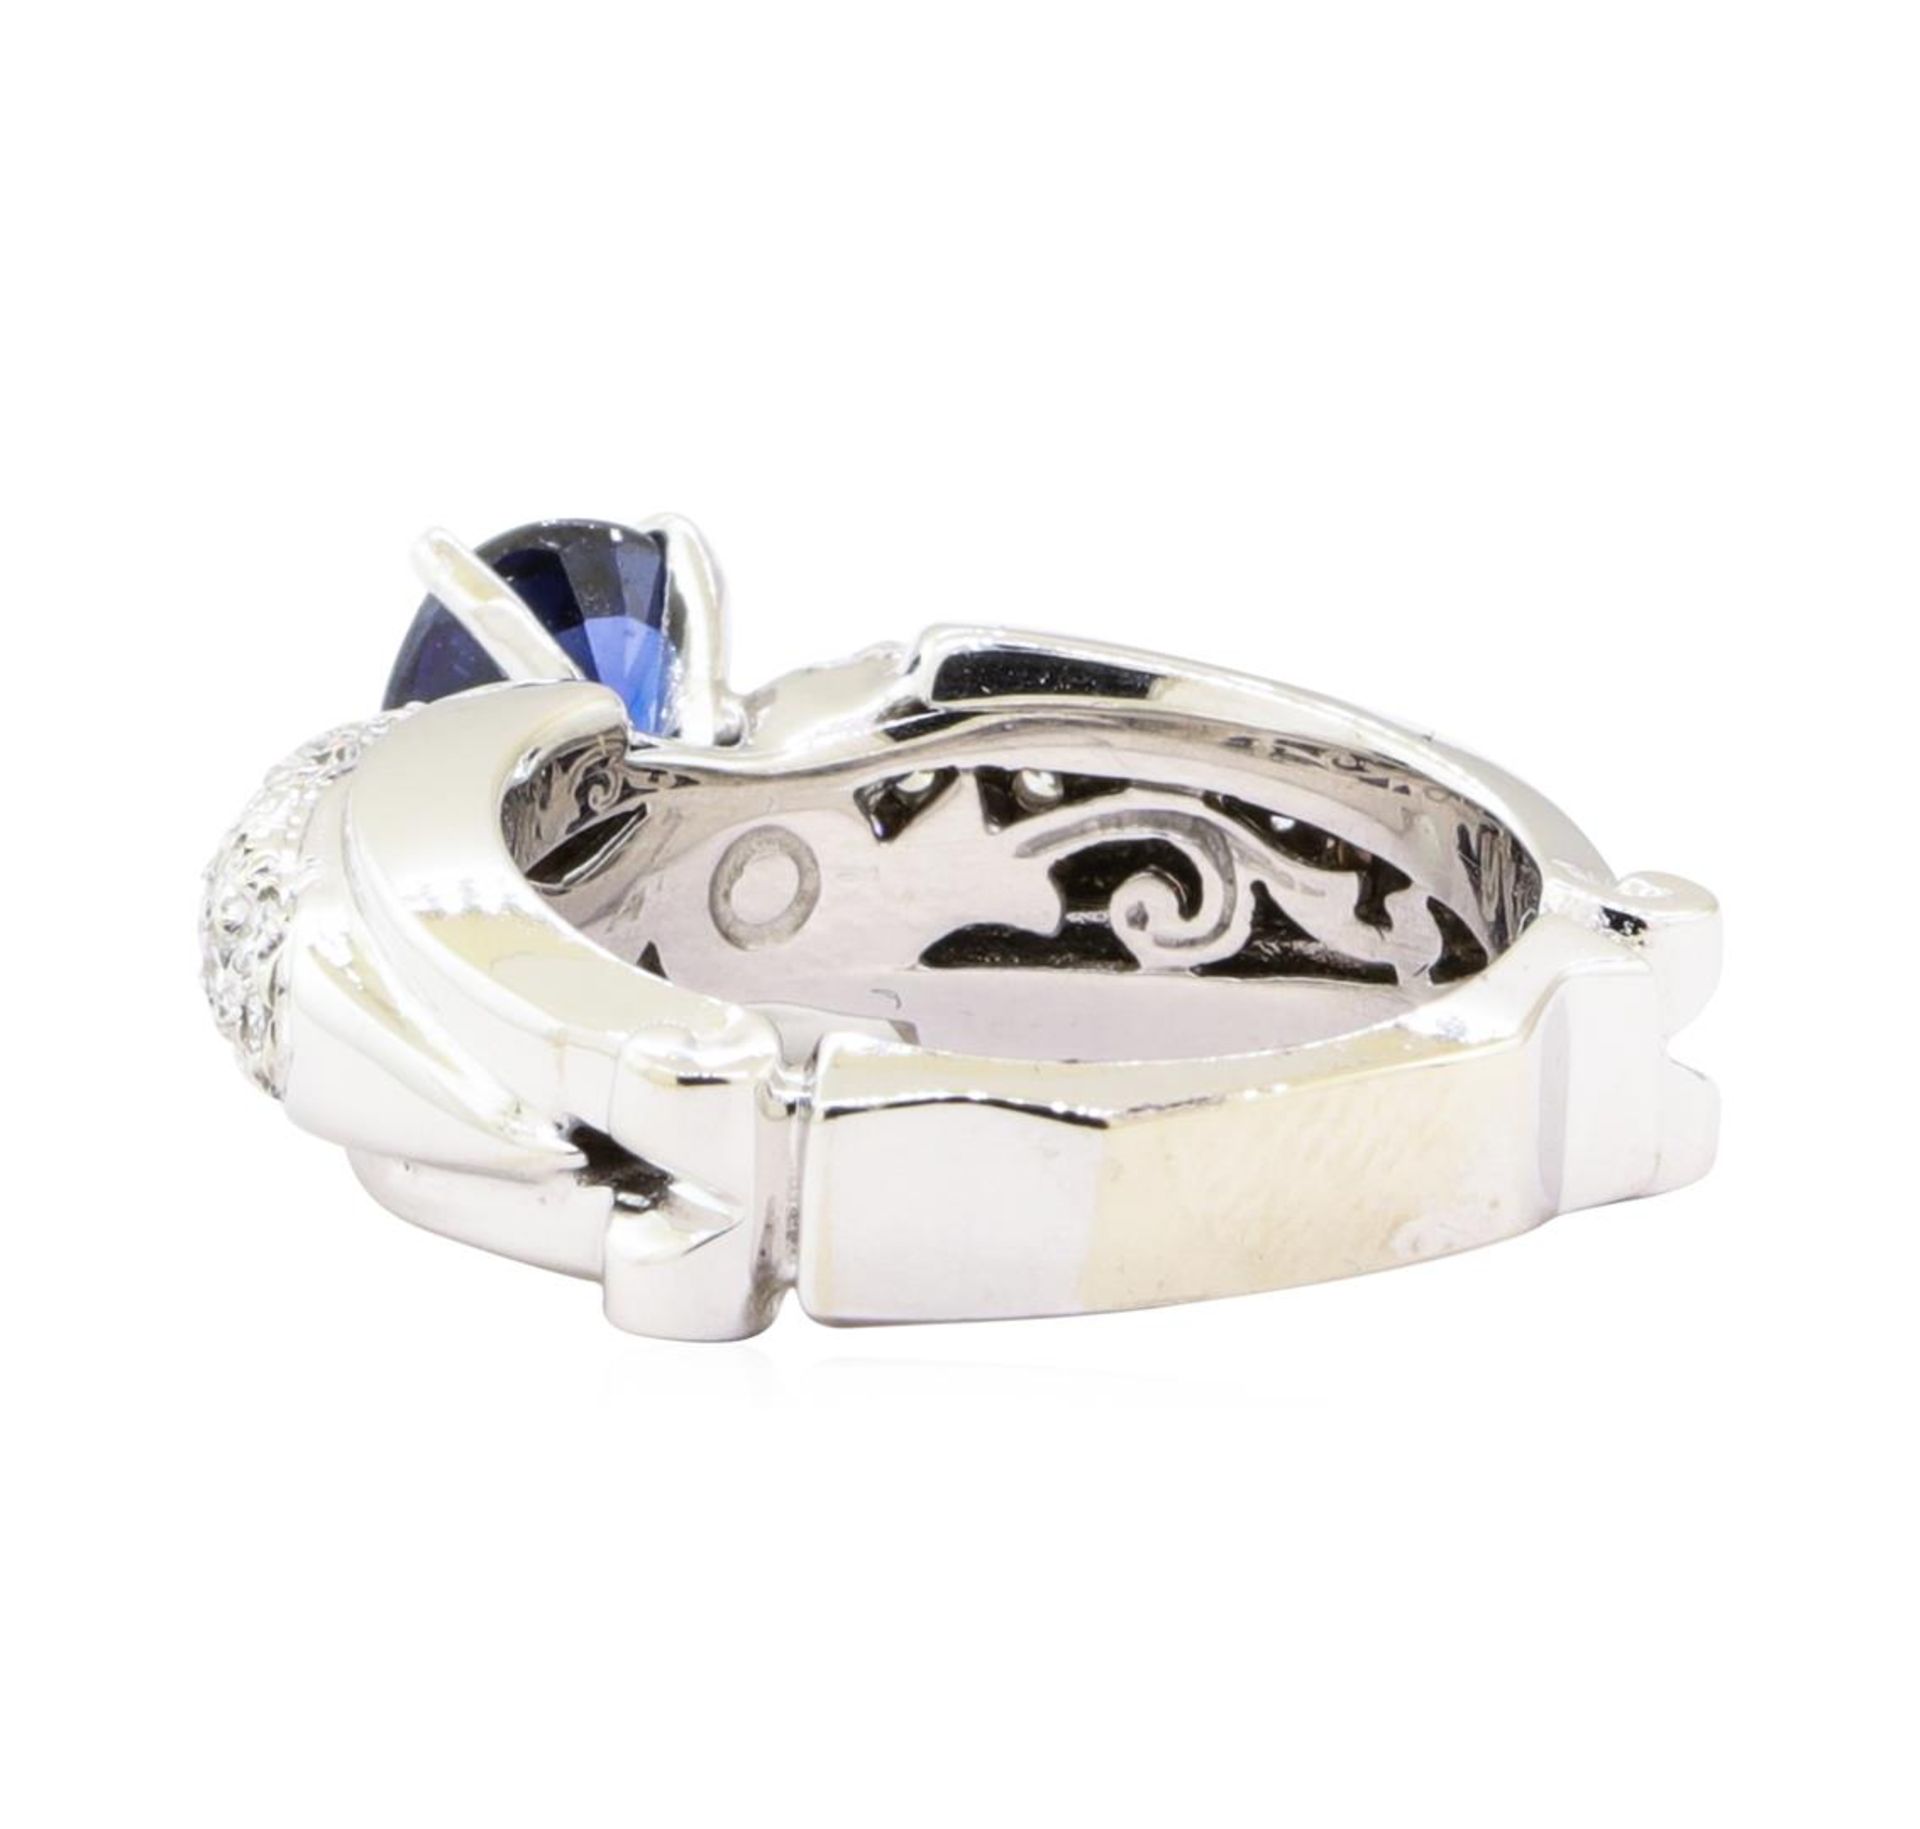 2.81 ctw Sapphire And Diamond Ring - 18KT White Gold - Image 3 of 5